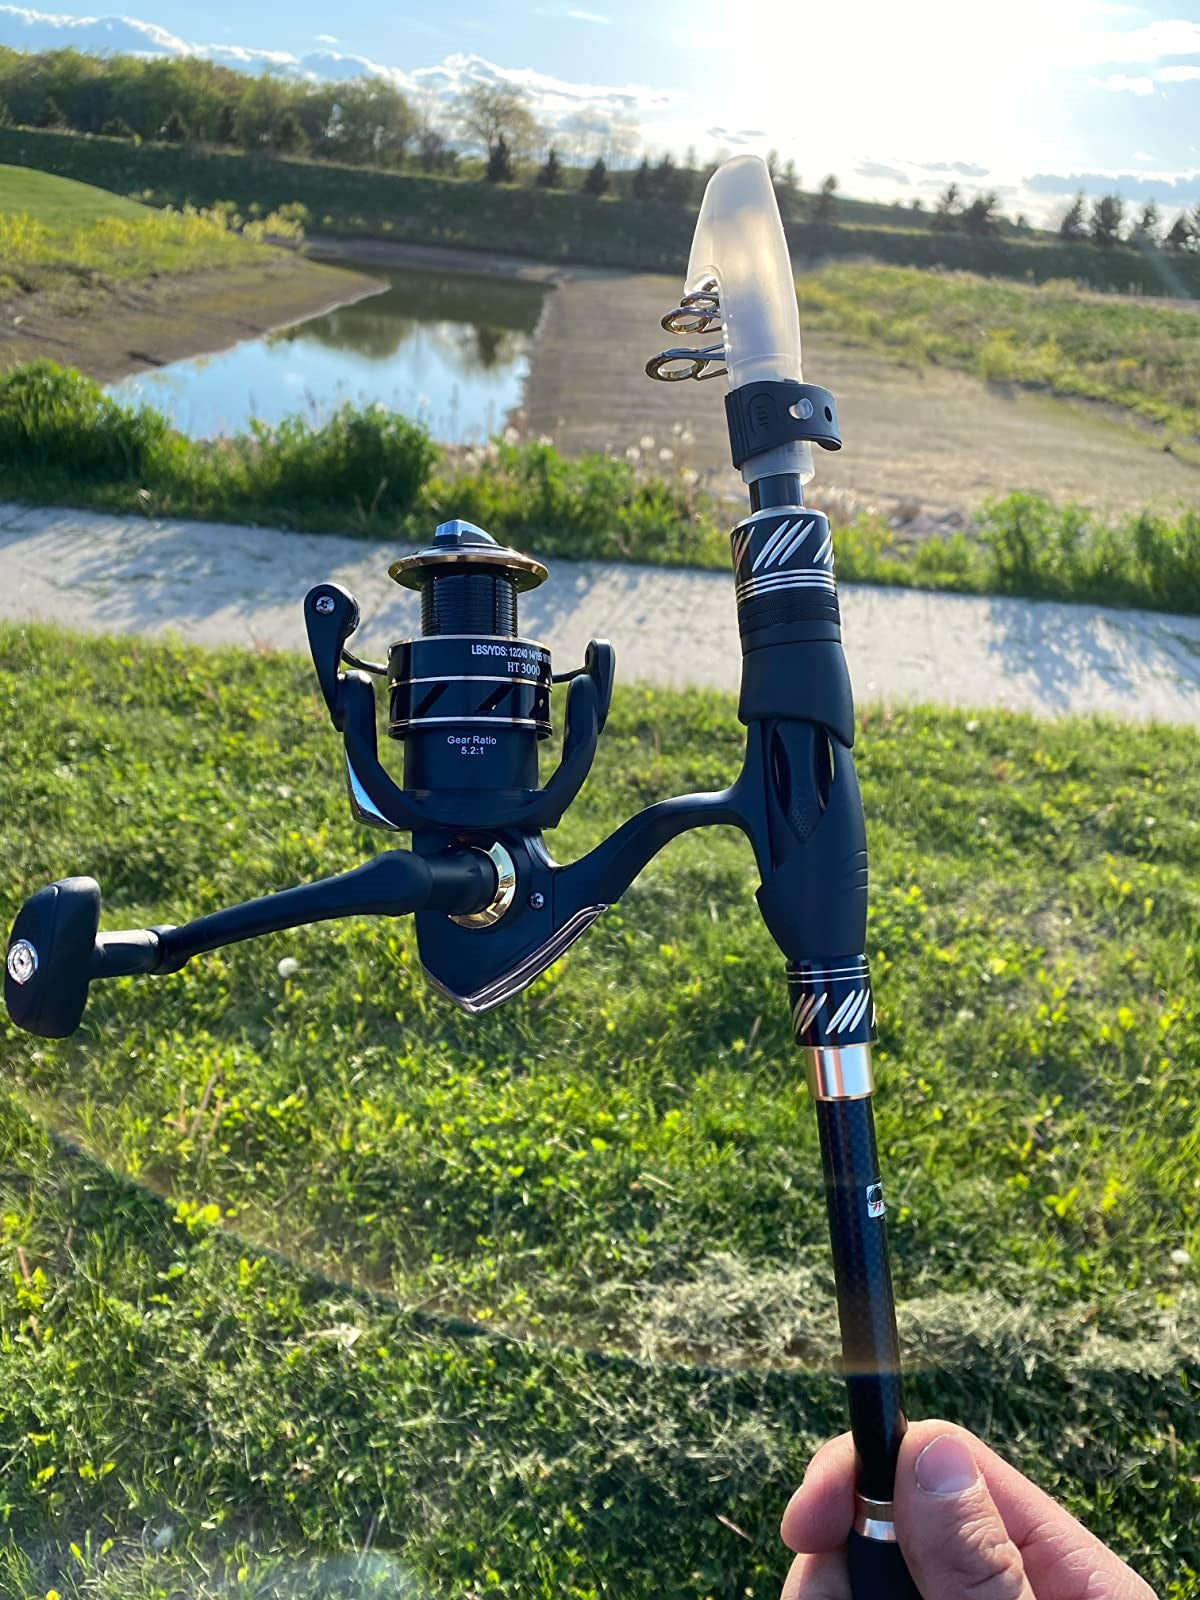 This is one good rod and reel combo.